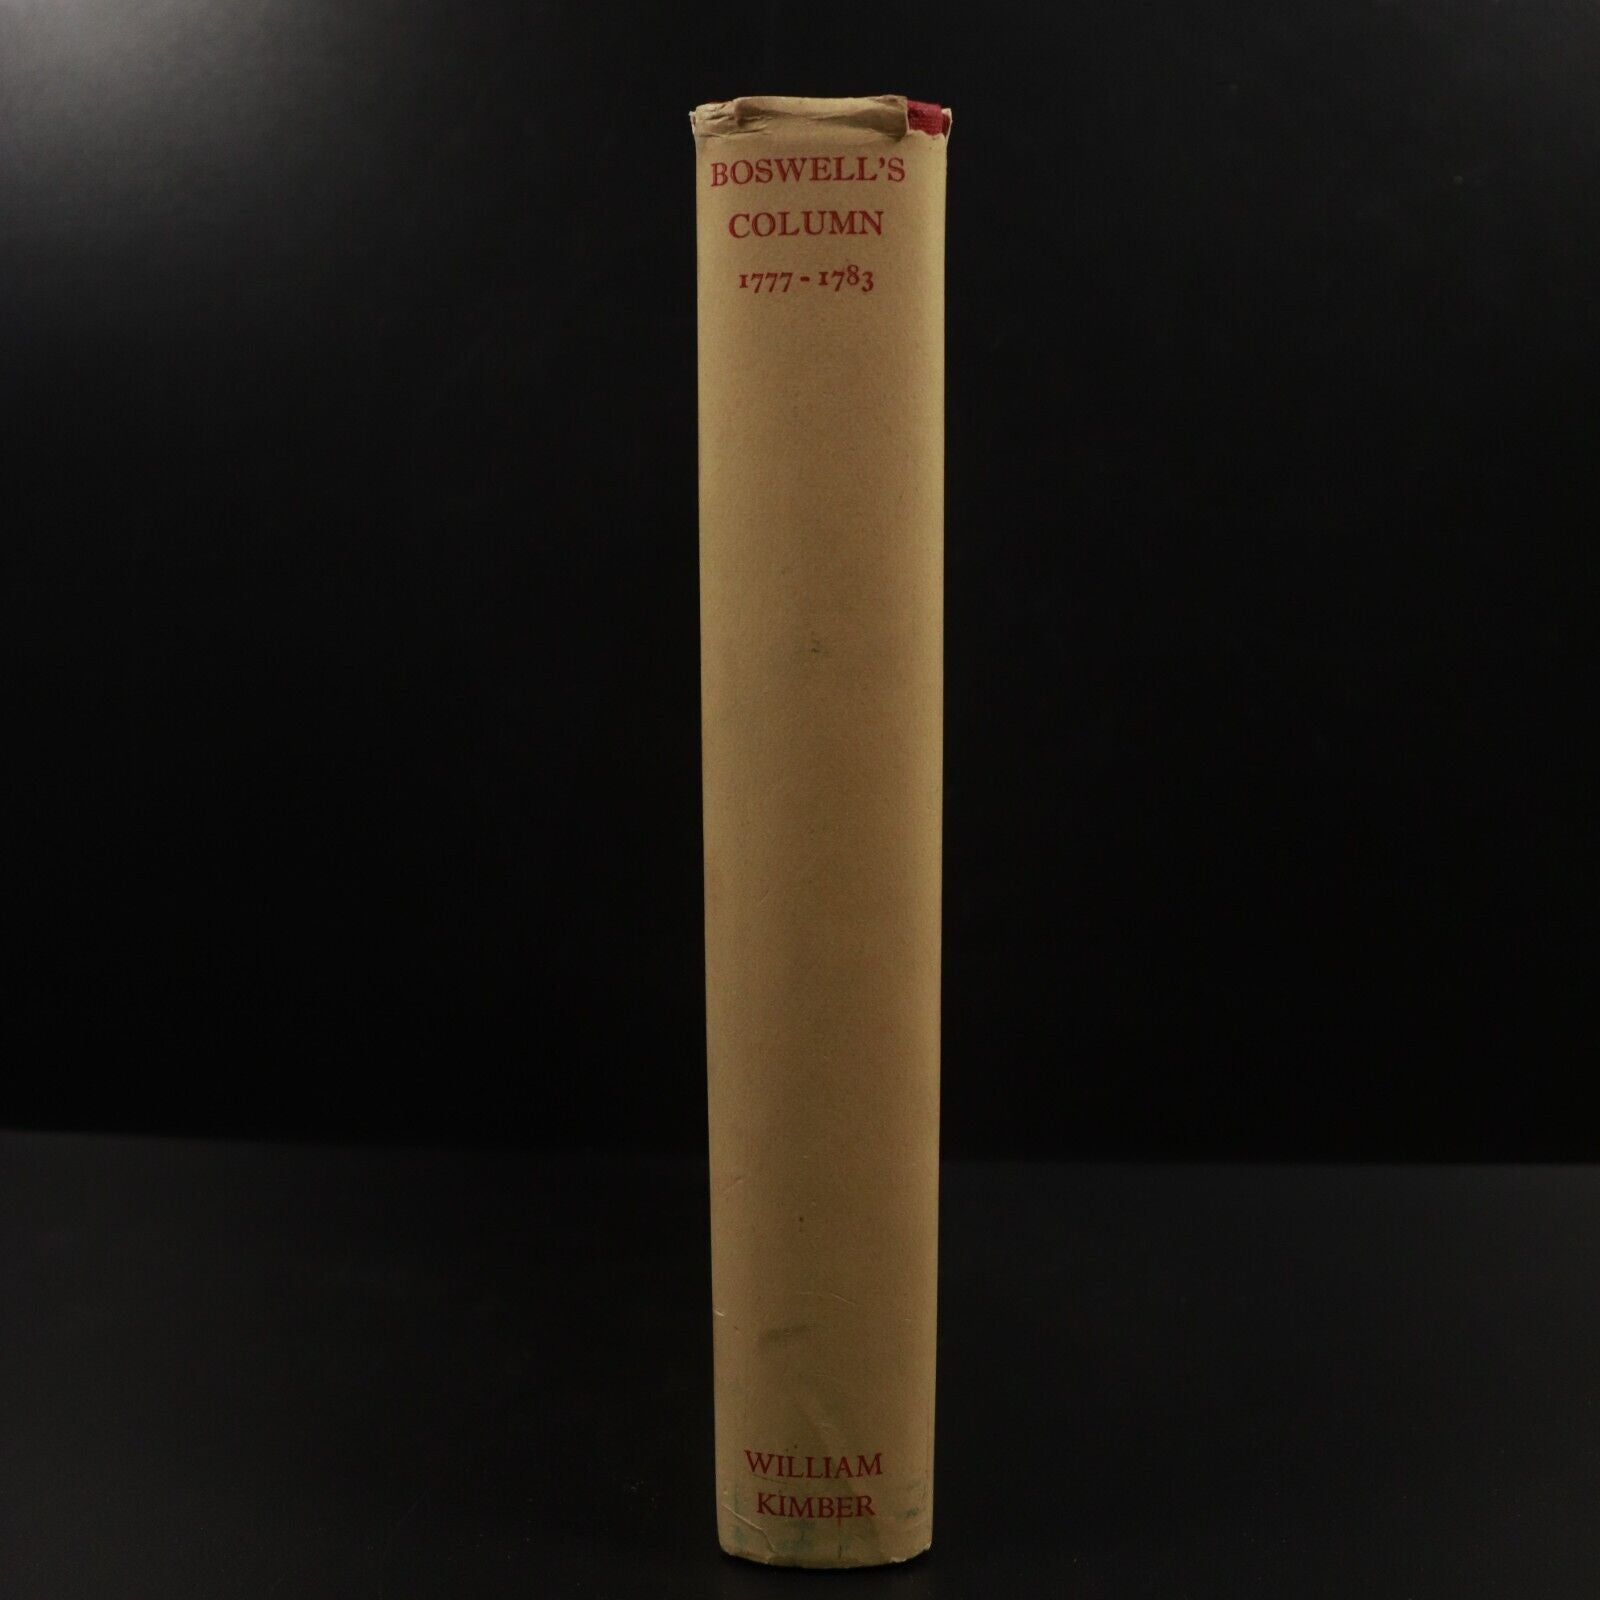 1951 Boswell's Column 1st Edition Vintage Scottish History Book